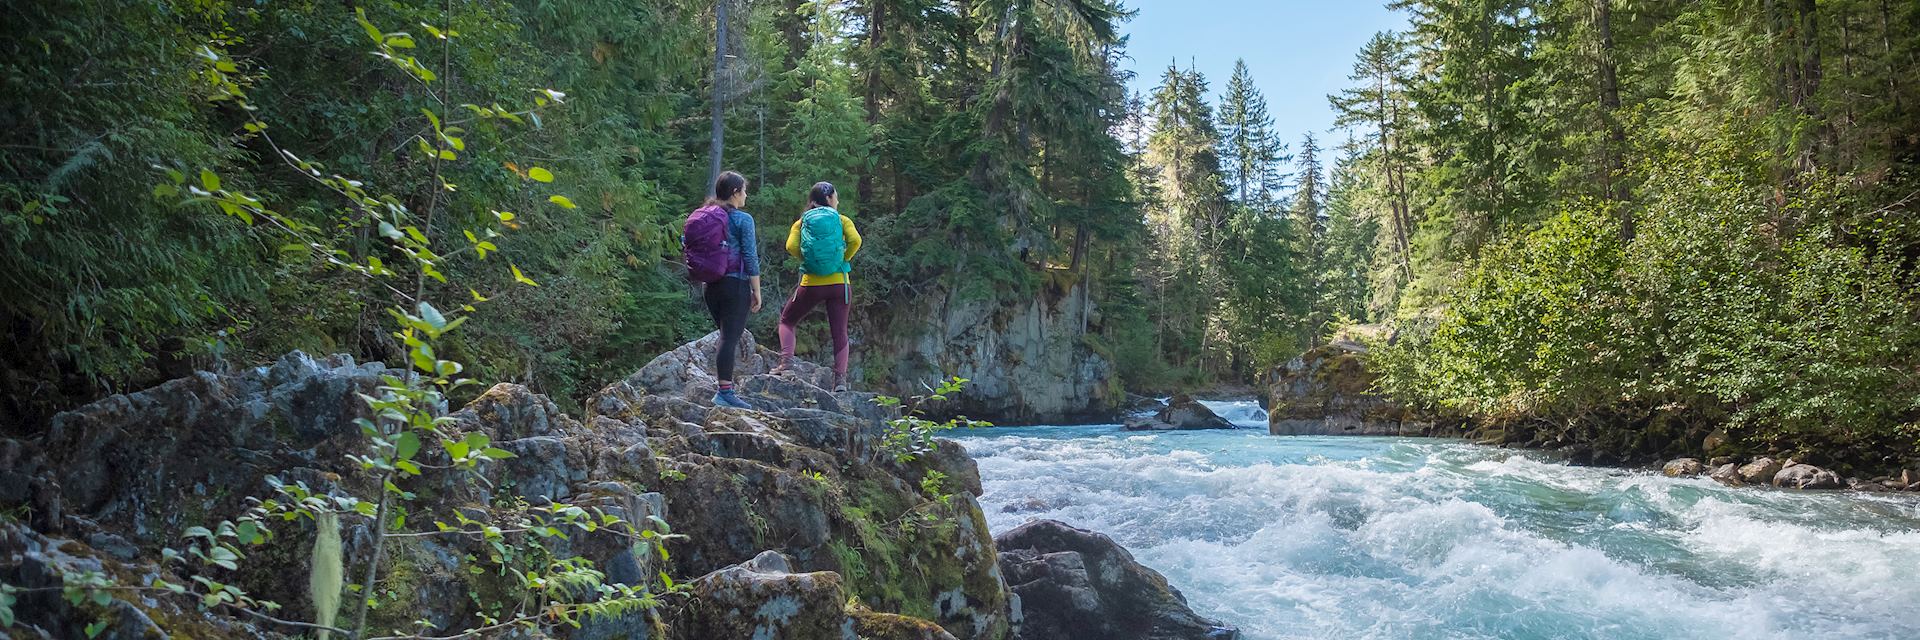 Hikers at the Cheakamus River, Whistler